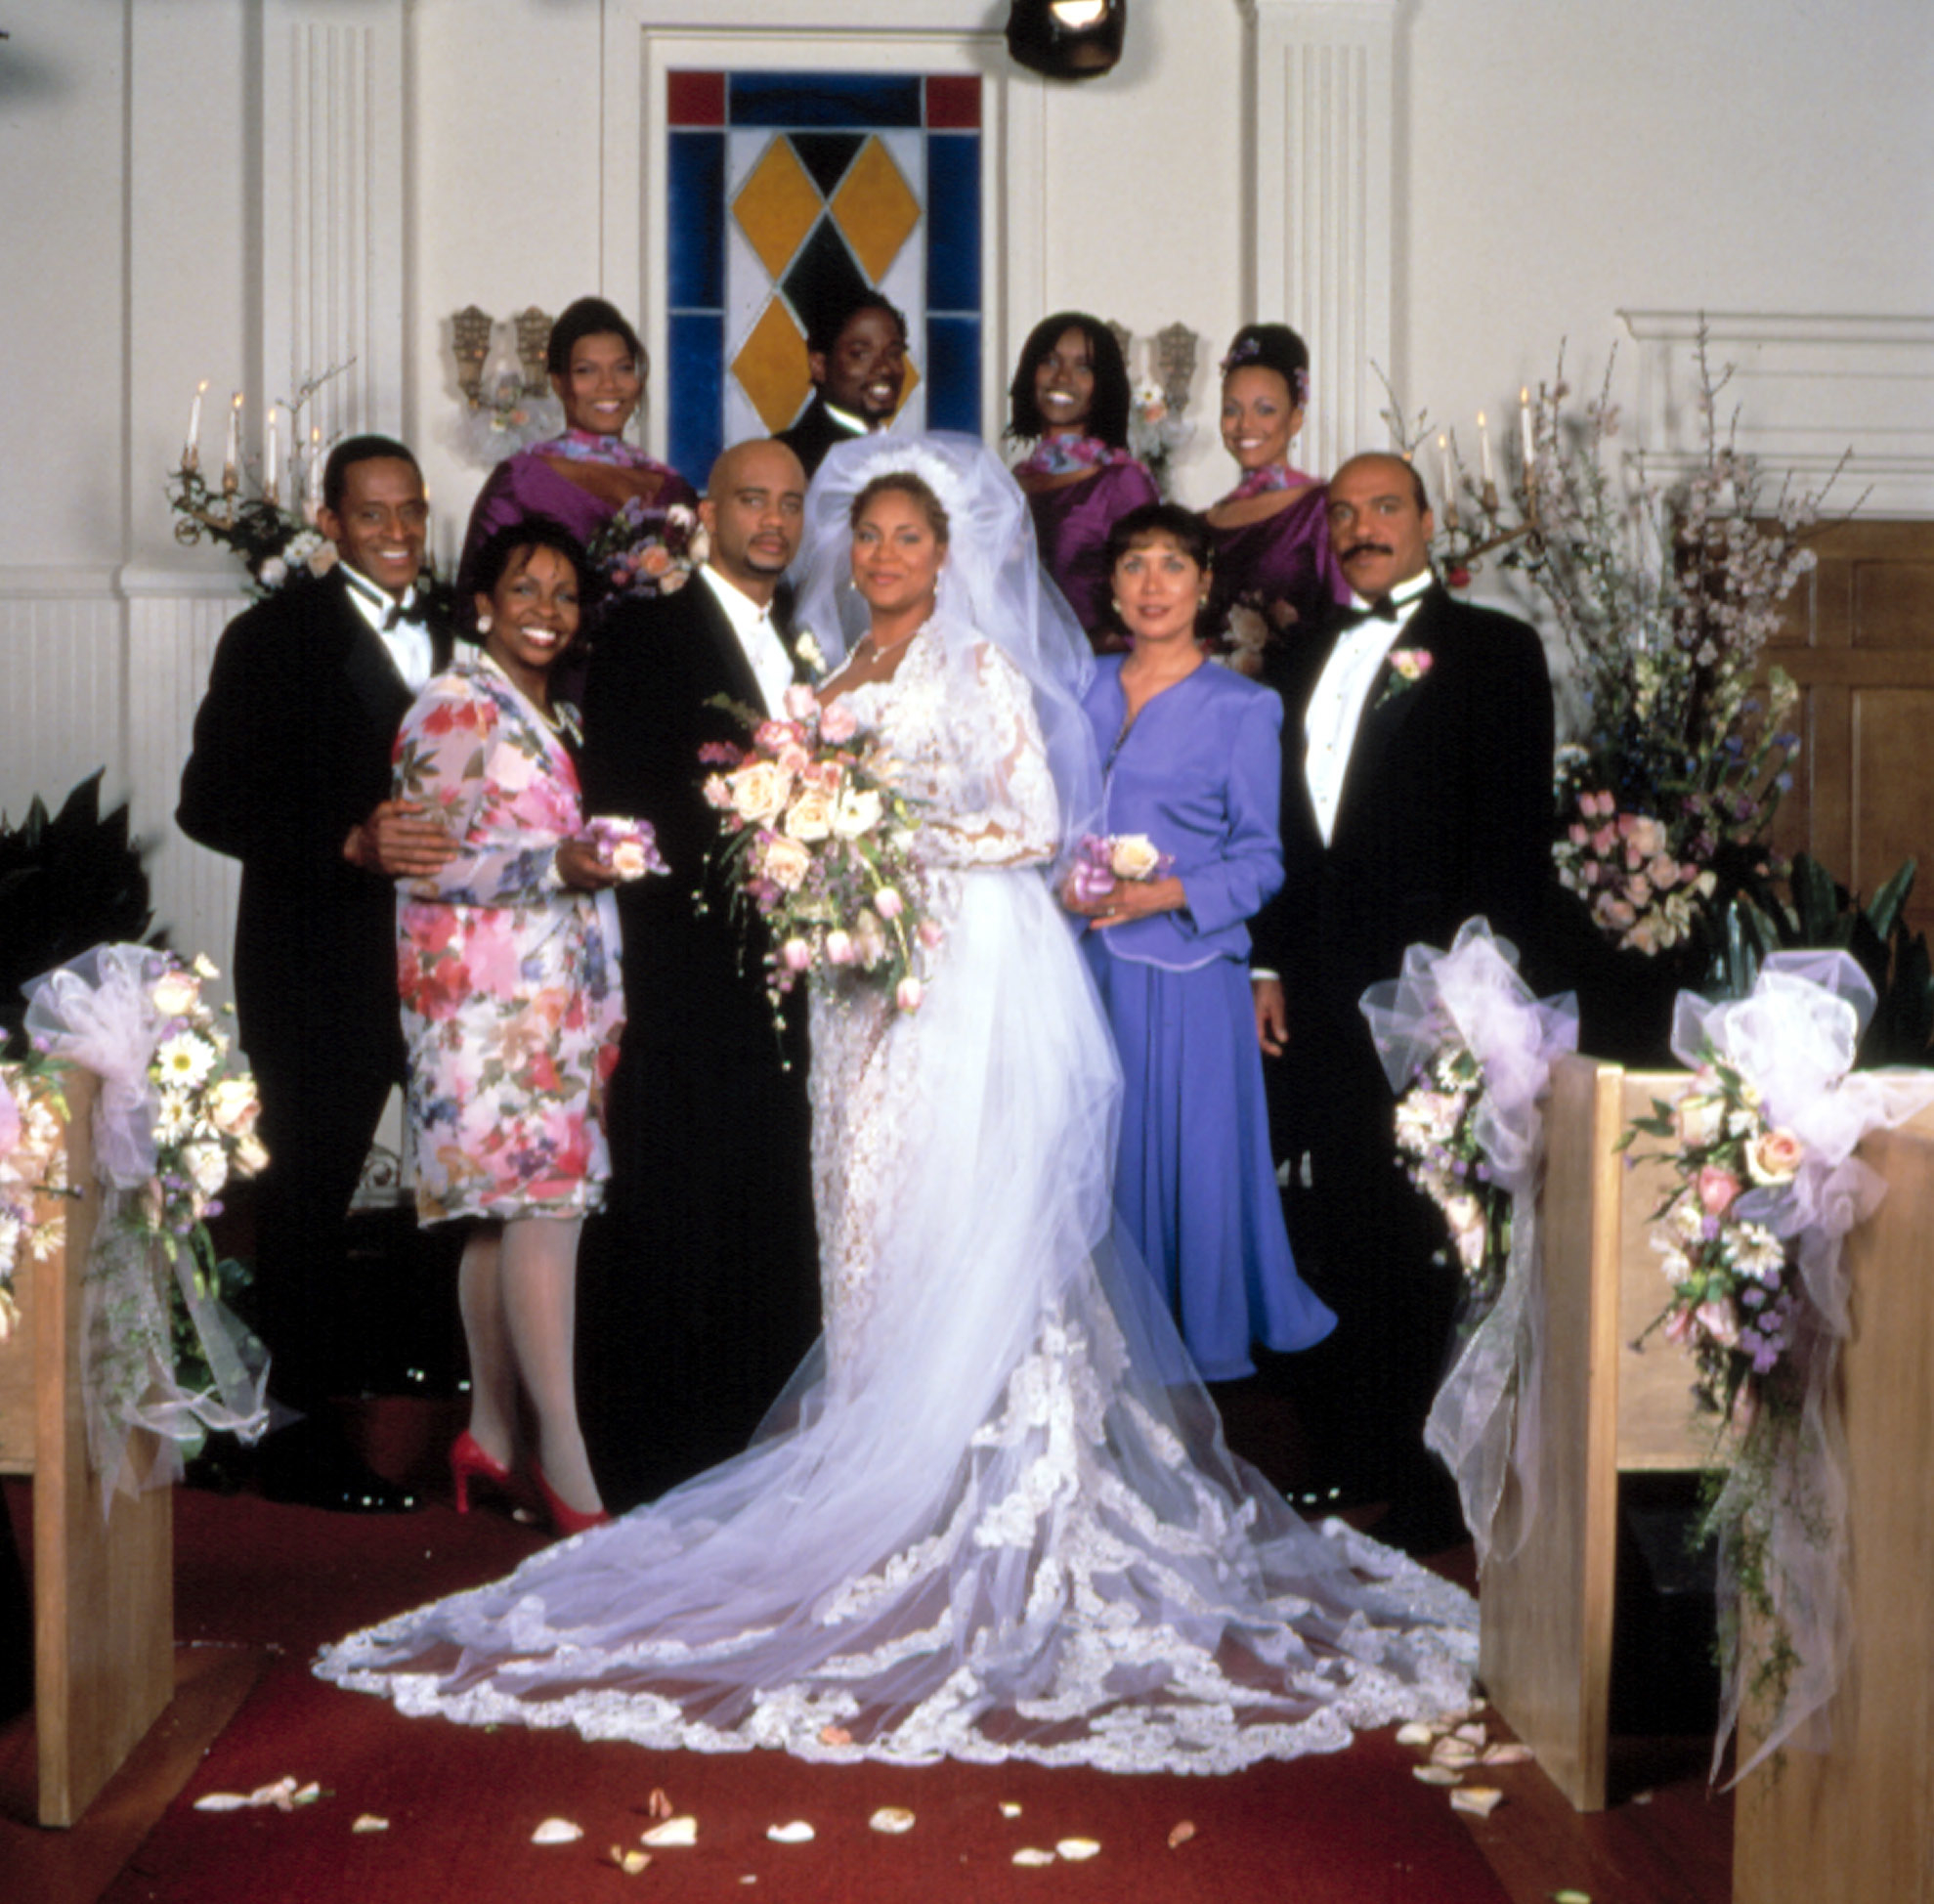 Group wedding photo with bride in a long gown, groom, and guests in formal attire standing in a church